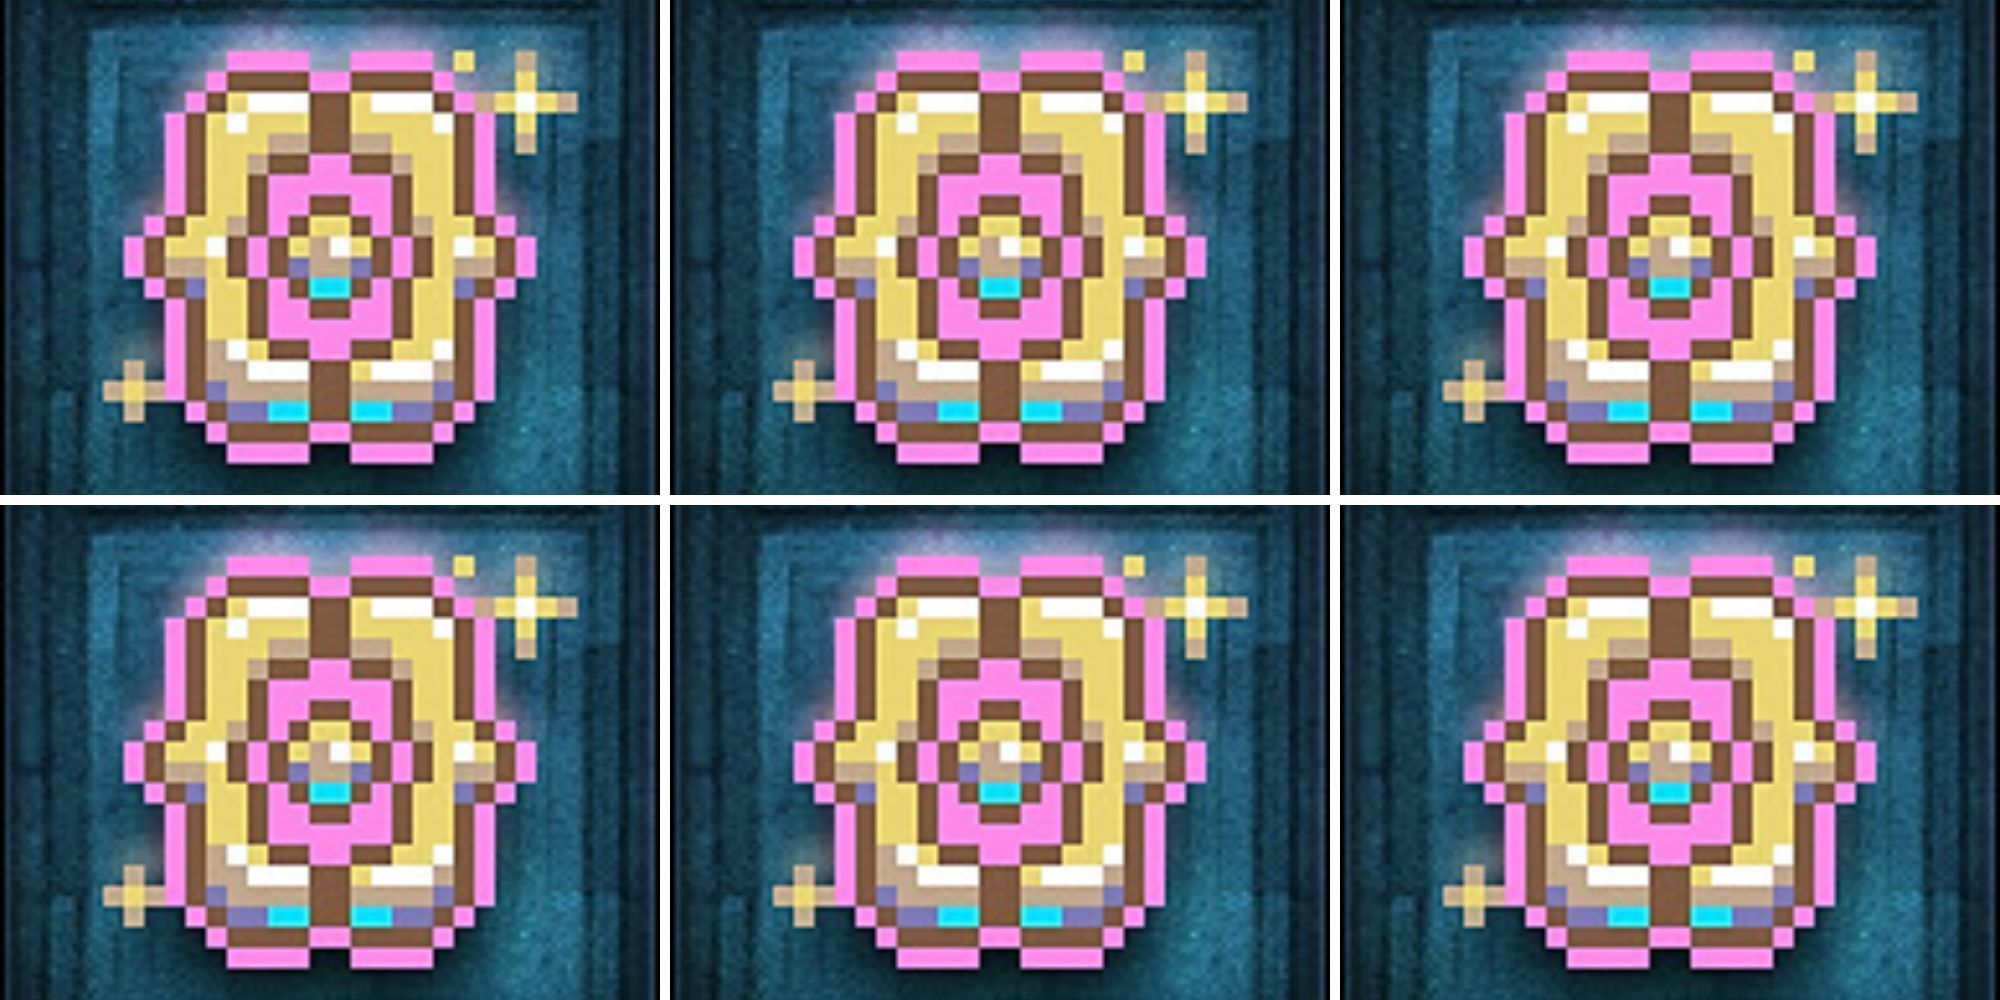 Repeating yellow and pink pattern of Pebcakes achievement icons.